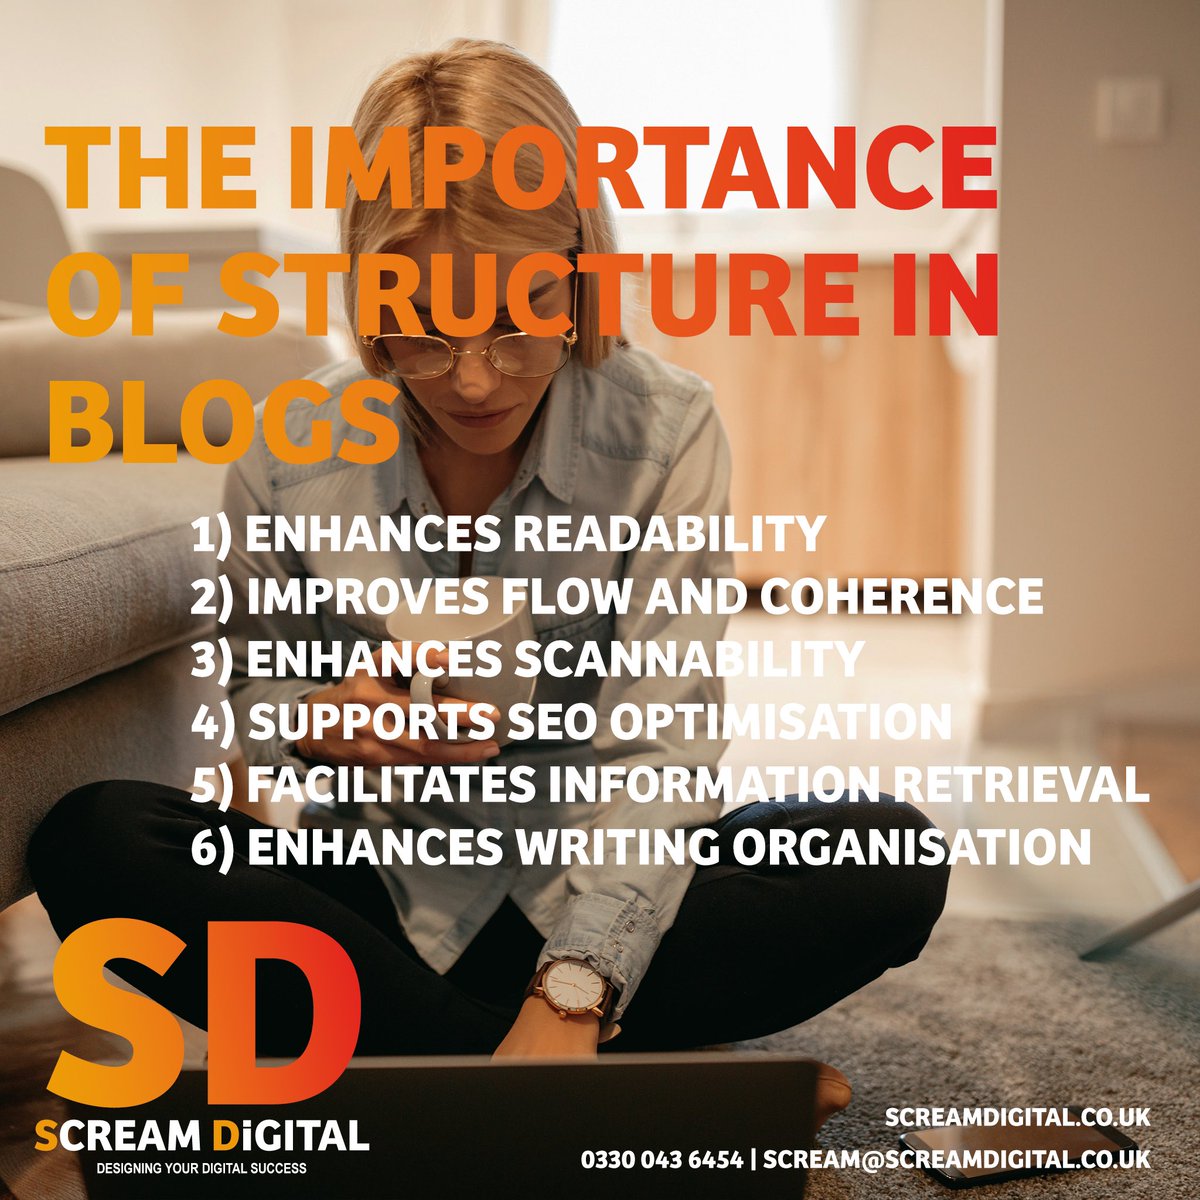 💡Hints and Tips 💡

The Importance of structure in blogs.

screamdigital.co.uk

#hints #tips #hintsandtips #usefulinformation #helpingothers #blogs #blogwriting #blogcreation #helpingsmall_uk #bloghelp #blogposts #helpingbusinessesgrow